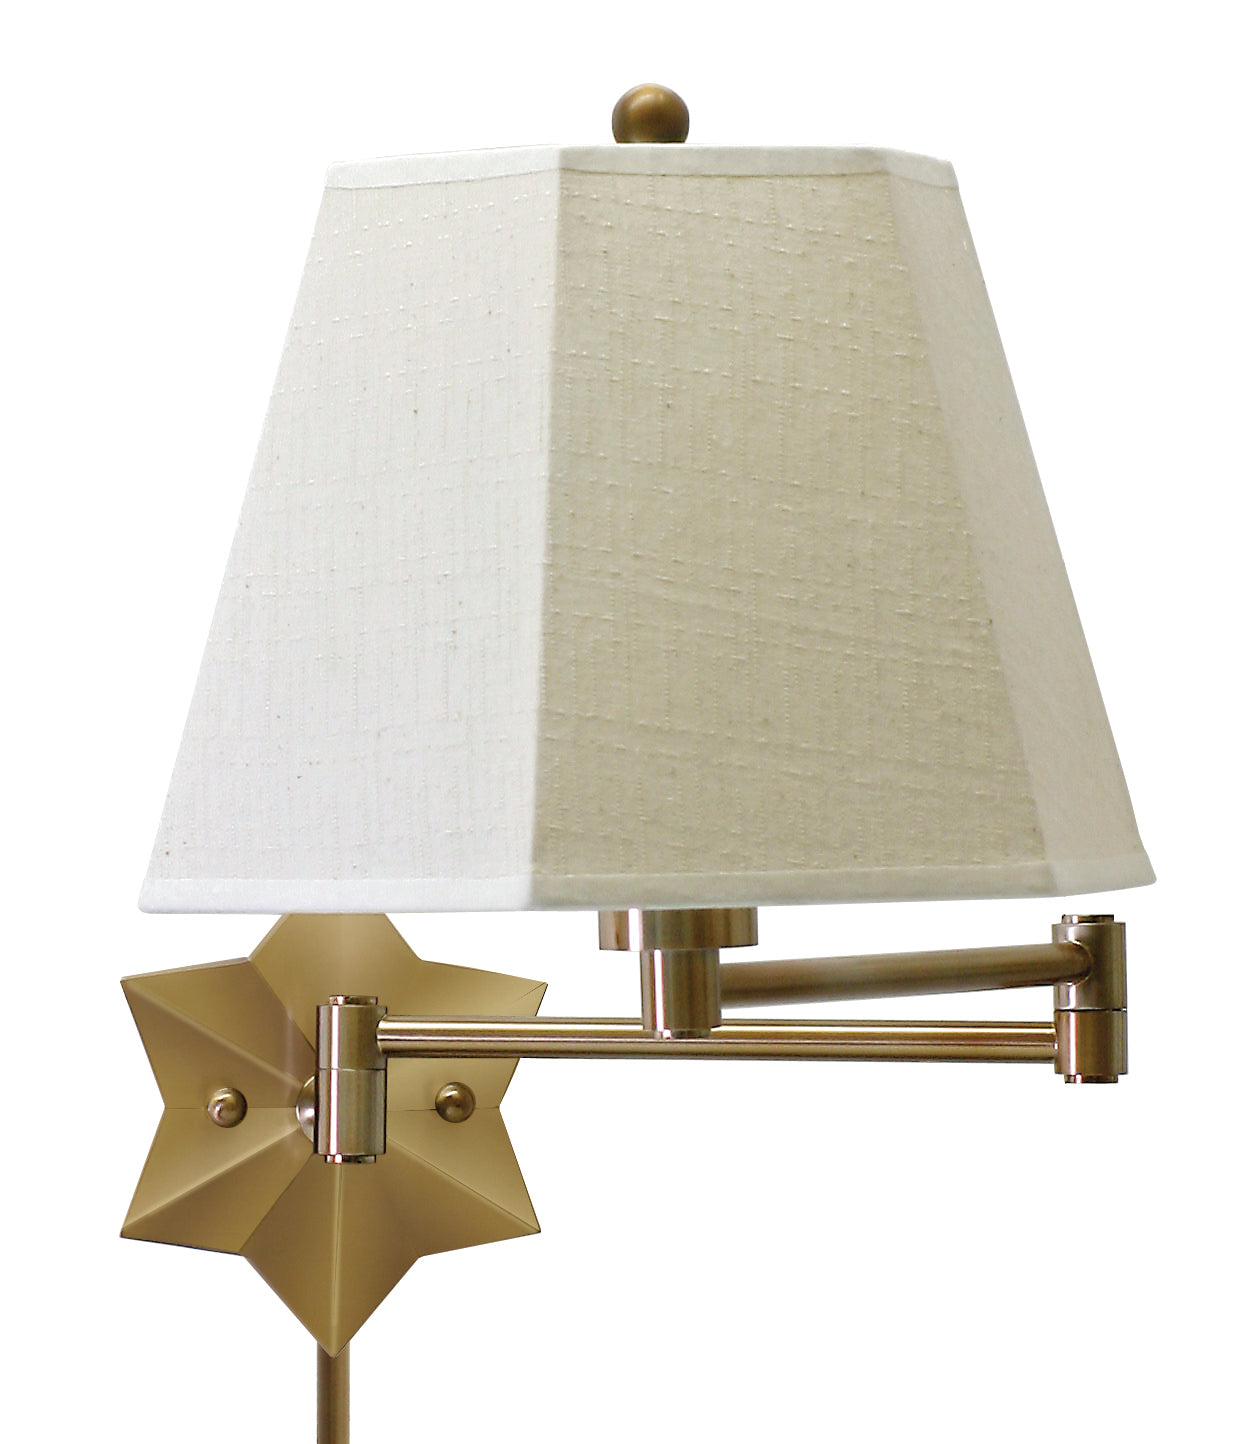 House of Troy Wall Swing Arm Lamp in Antique Brass WS751-AB